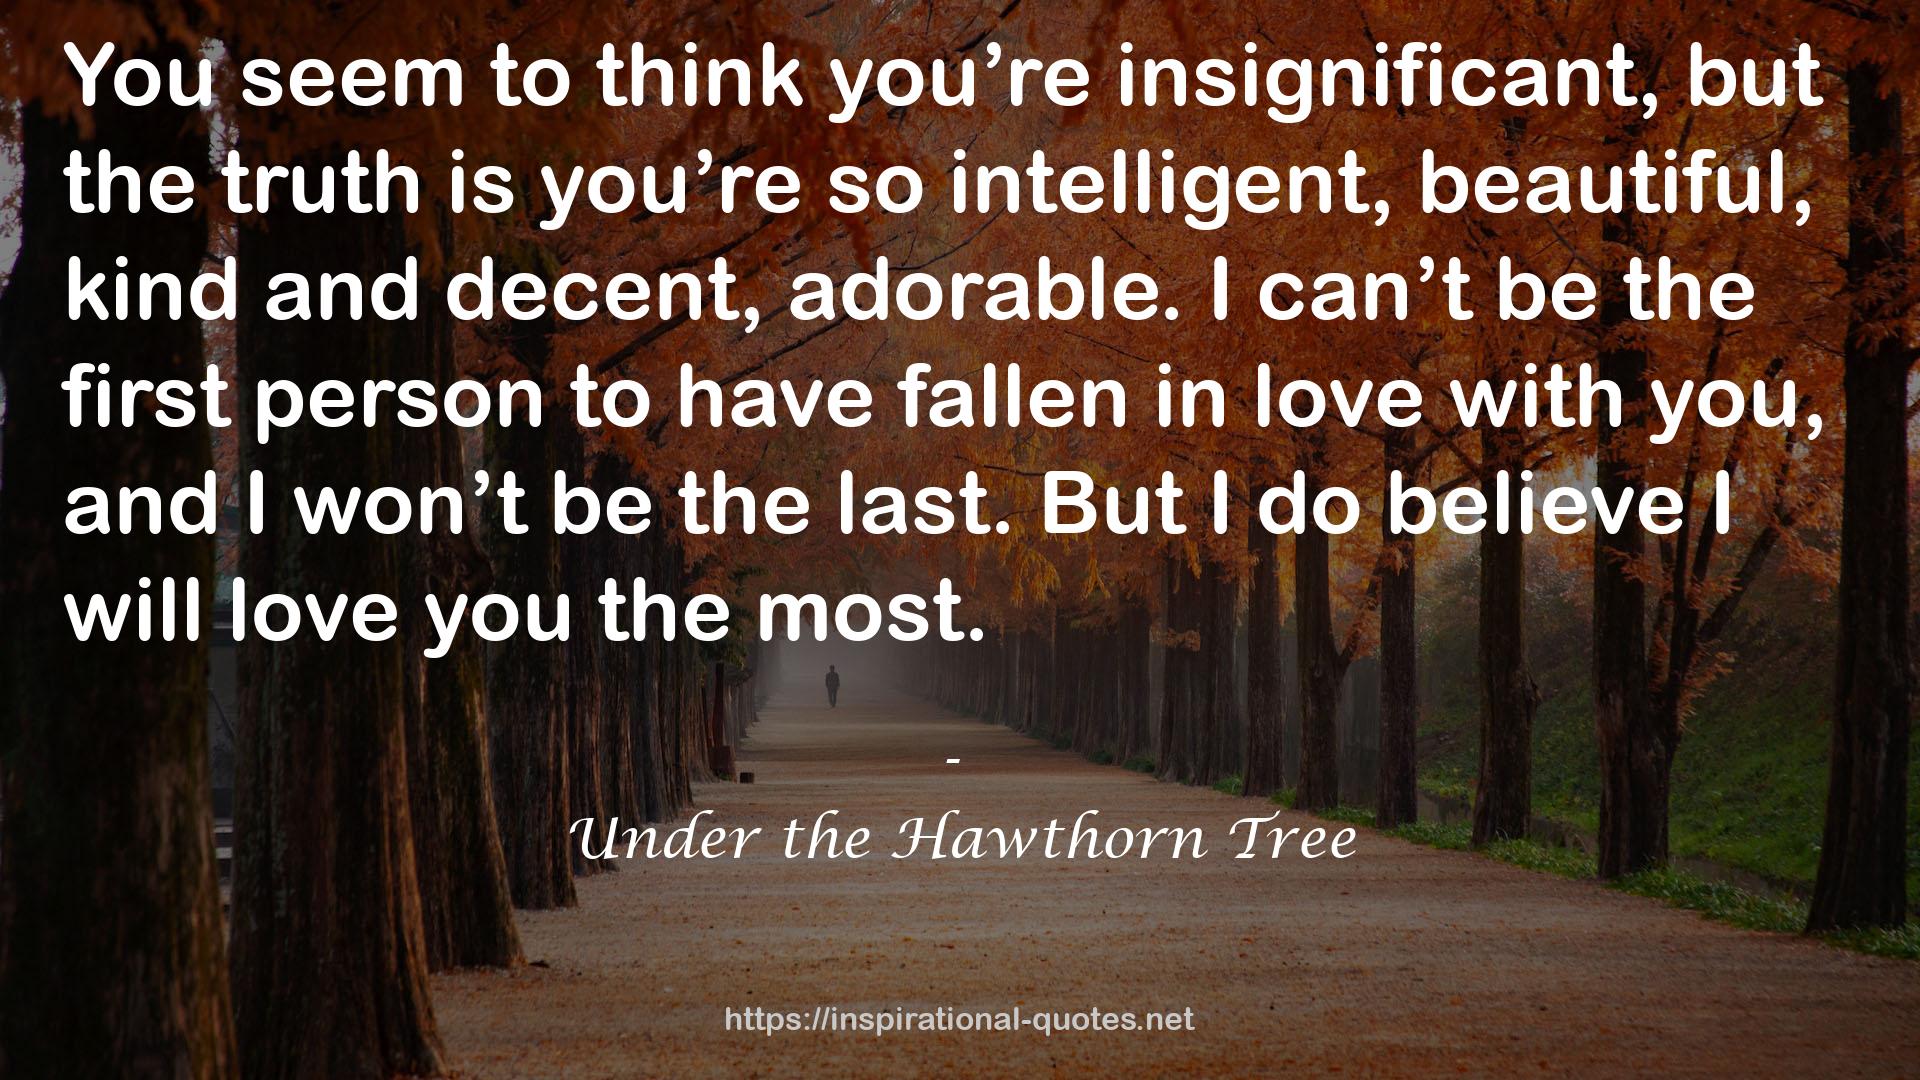 Under the Hawthorn Tree QUOTES